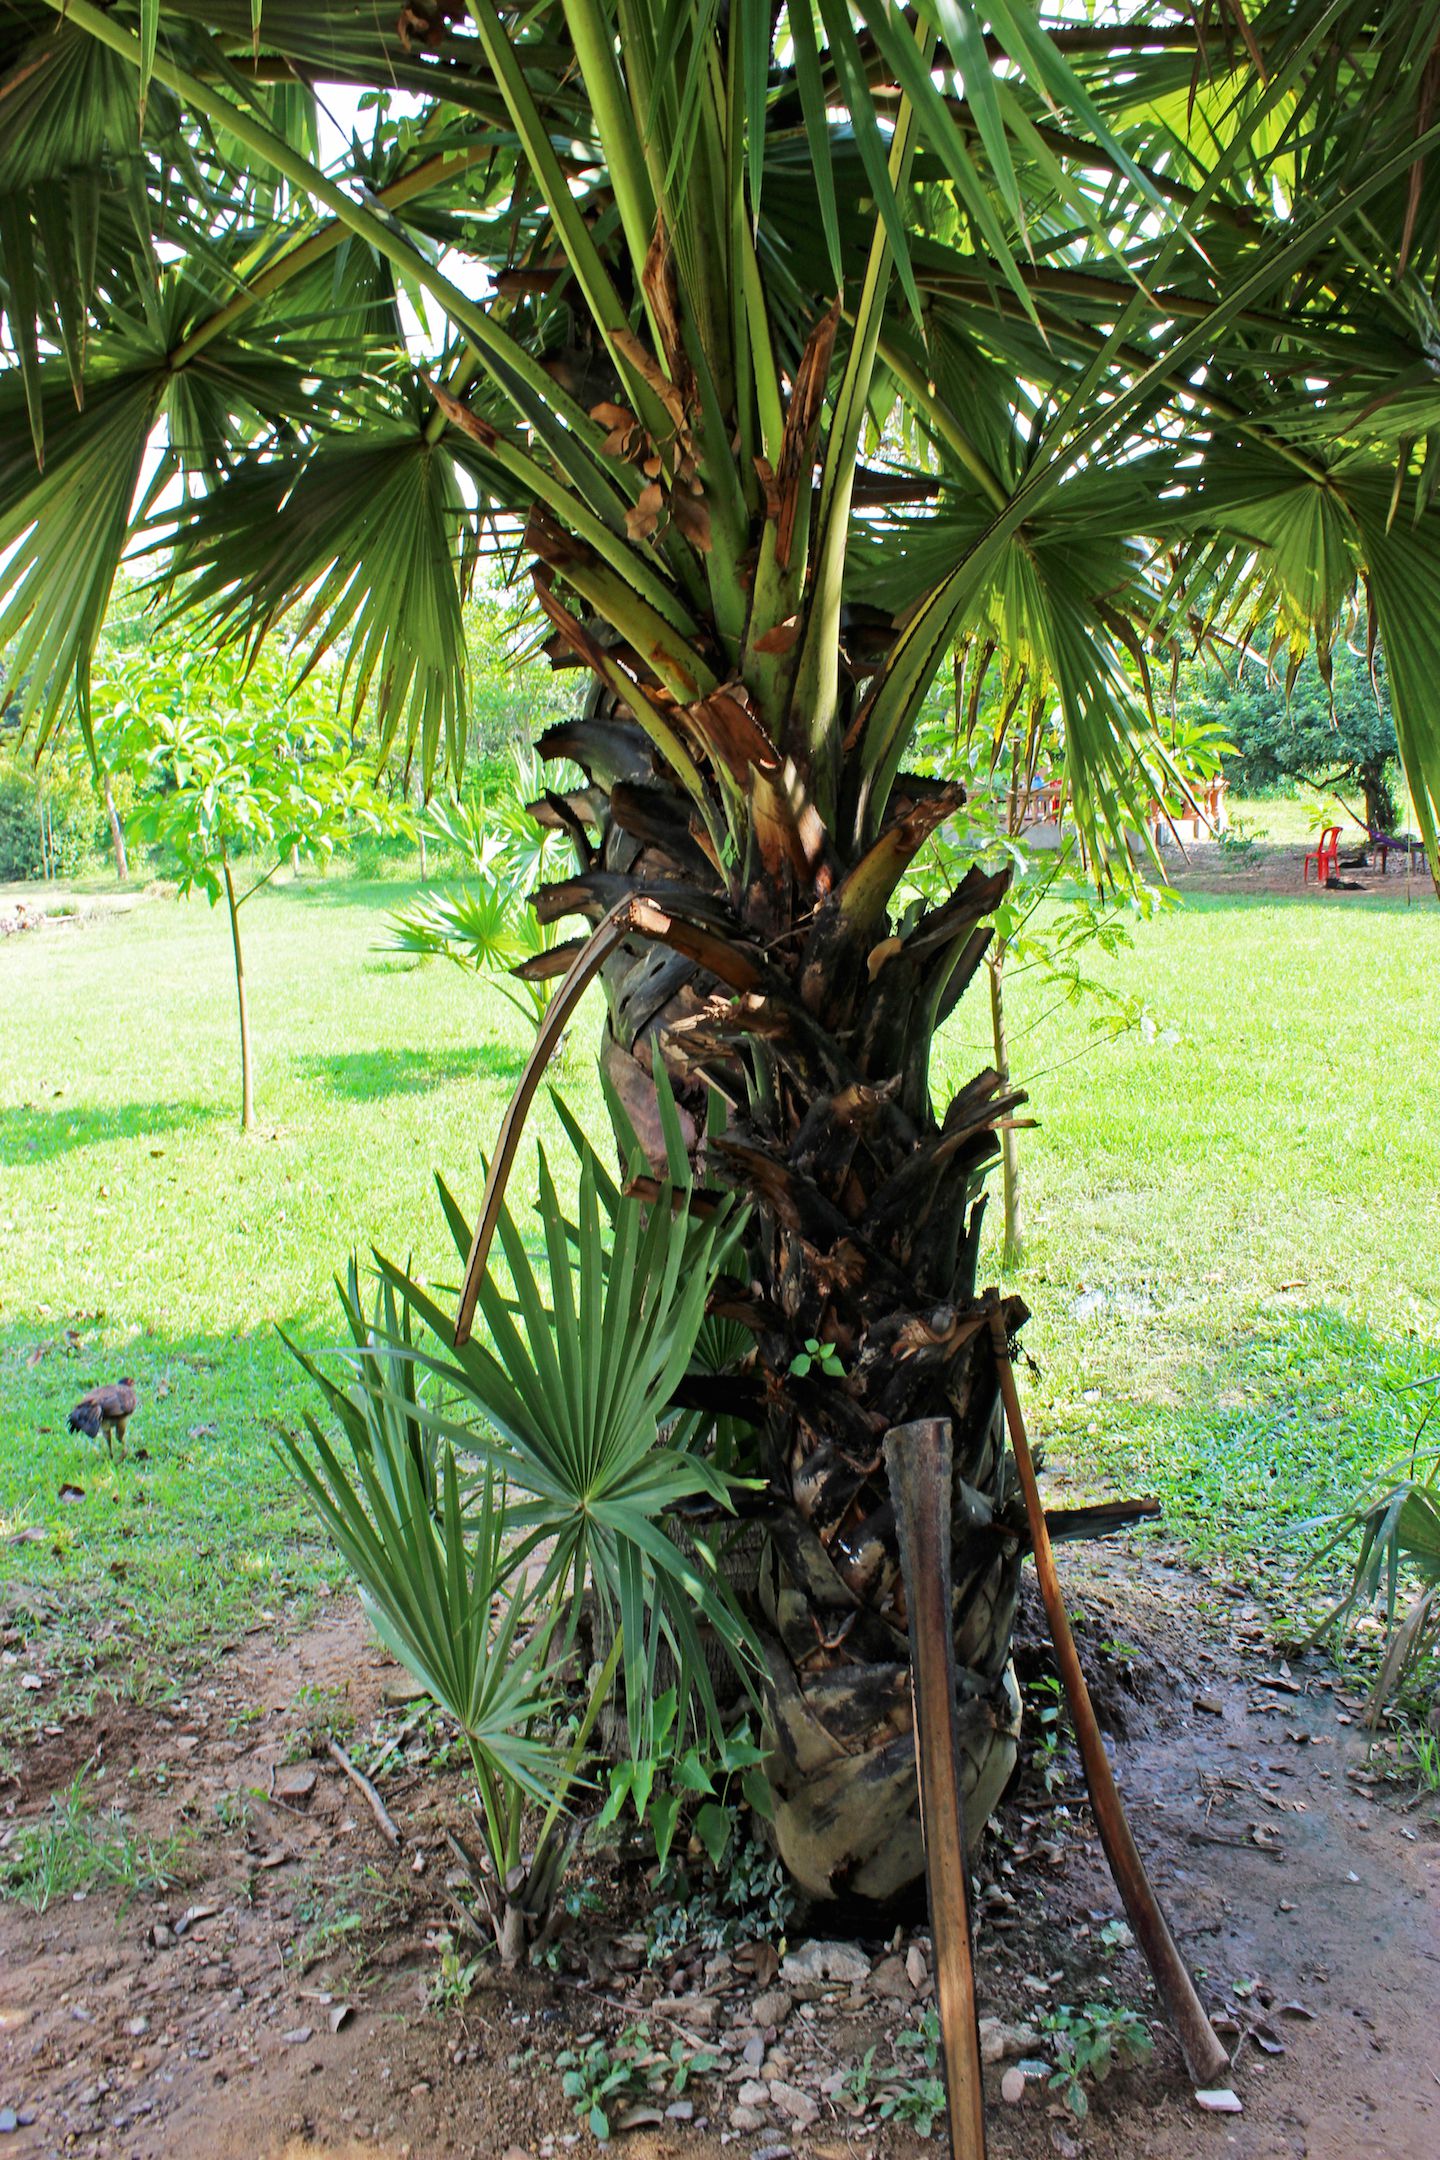 It might look like a simple palm tree, but the branches were used to cut prisoners throats